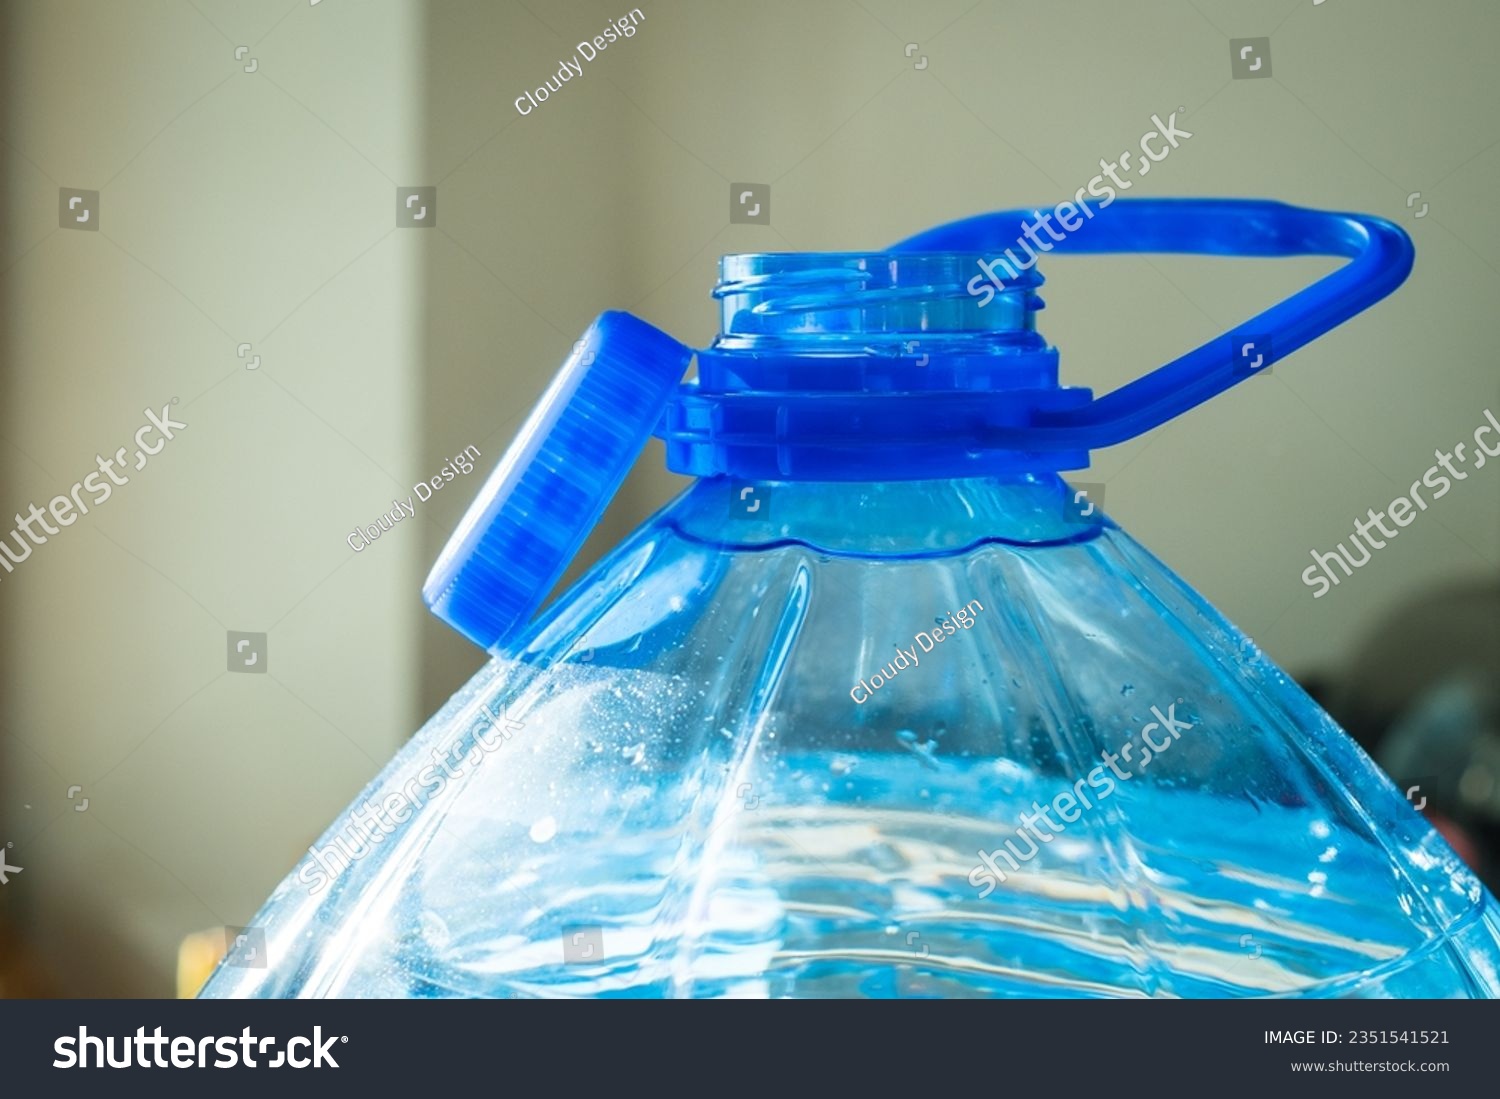 Water bottle with attached cap for easy collection and recycling. Tethered Cap. Litter prevention EU Directive 2019904. #2351541521